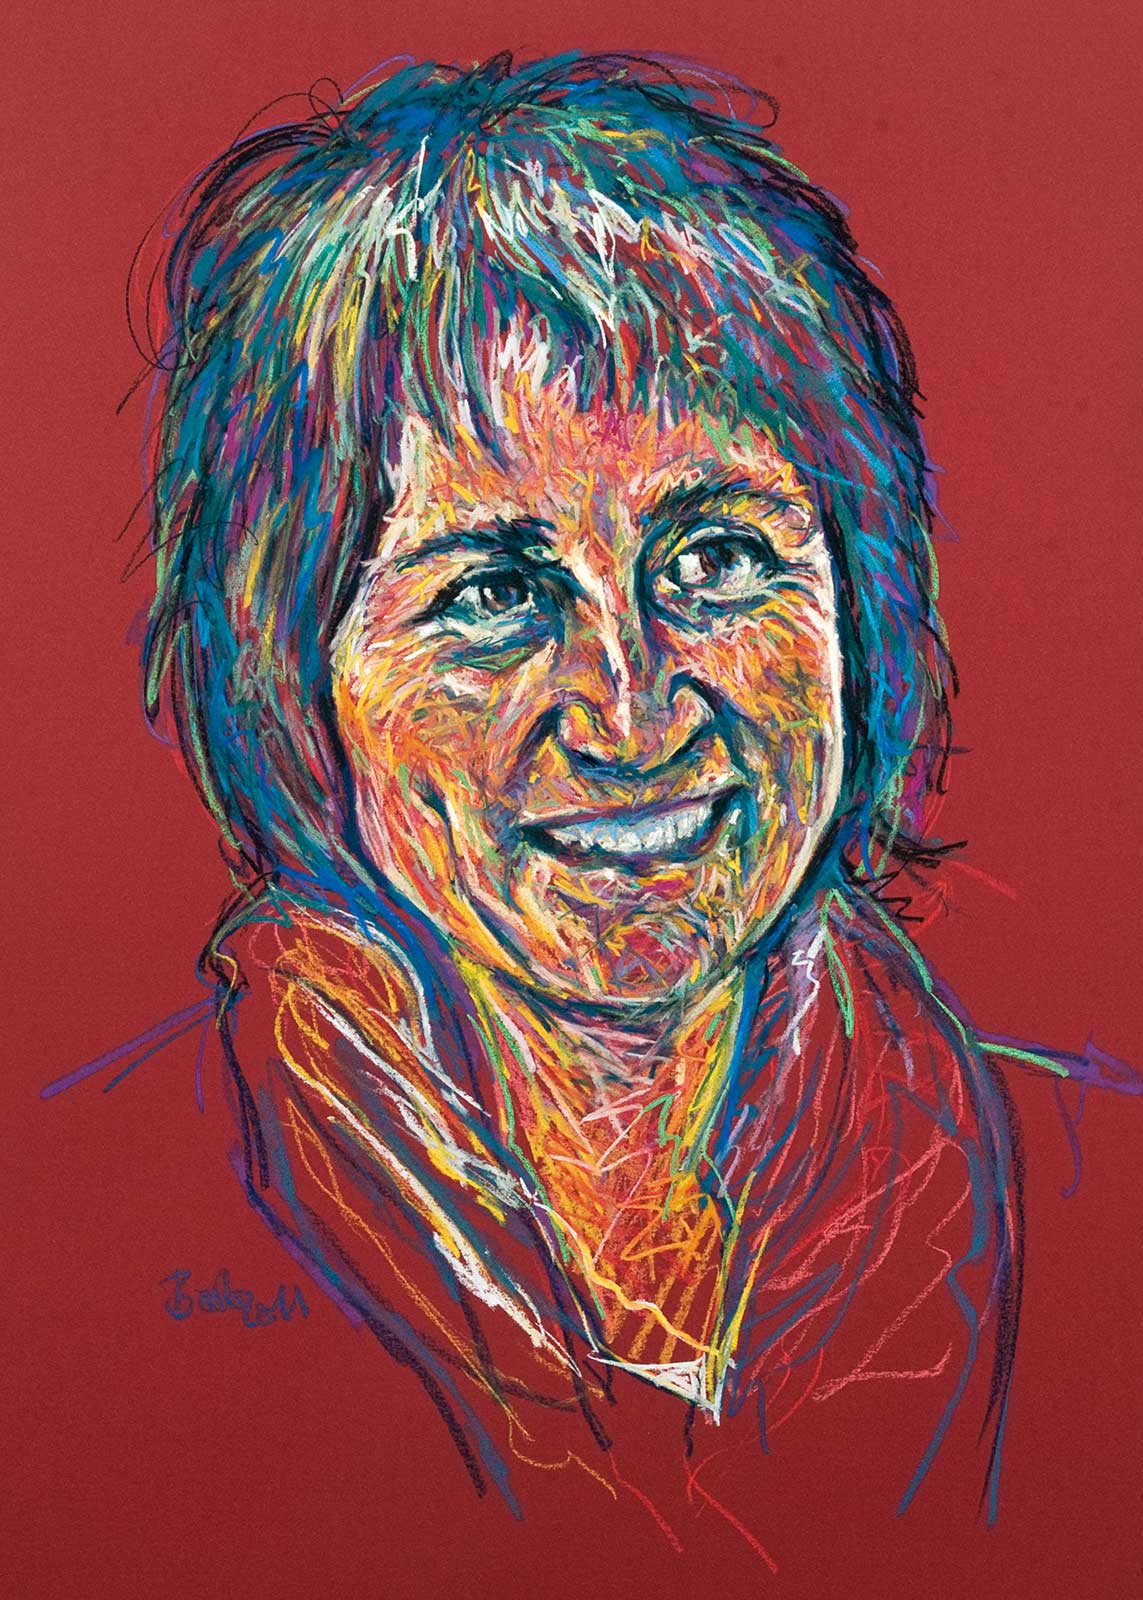 Colorful portrait drawing of Martina in pastels on red paper; Farbenfrohes Porträt von Martina in Pastellkreide auf rotem Papier